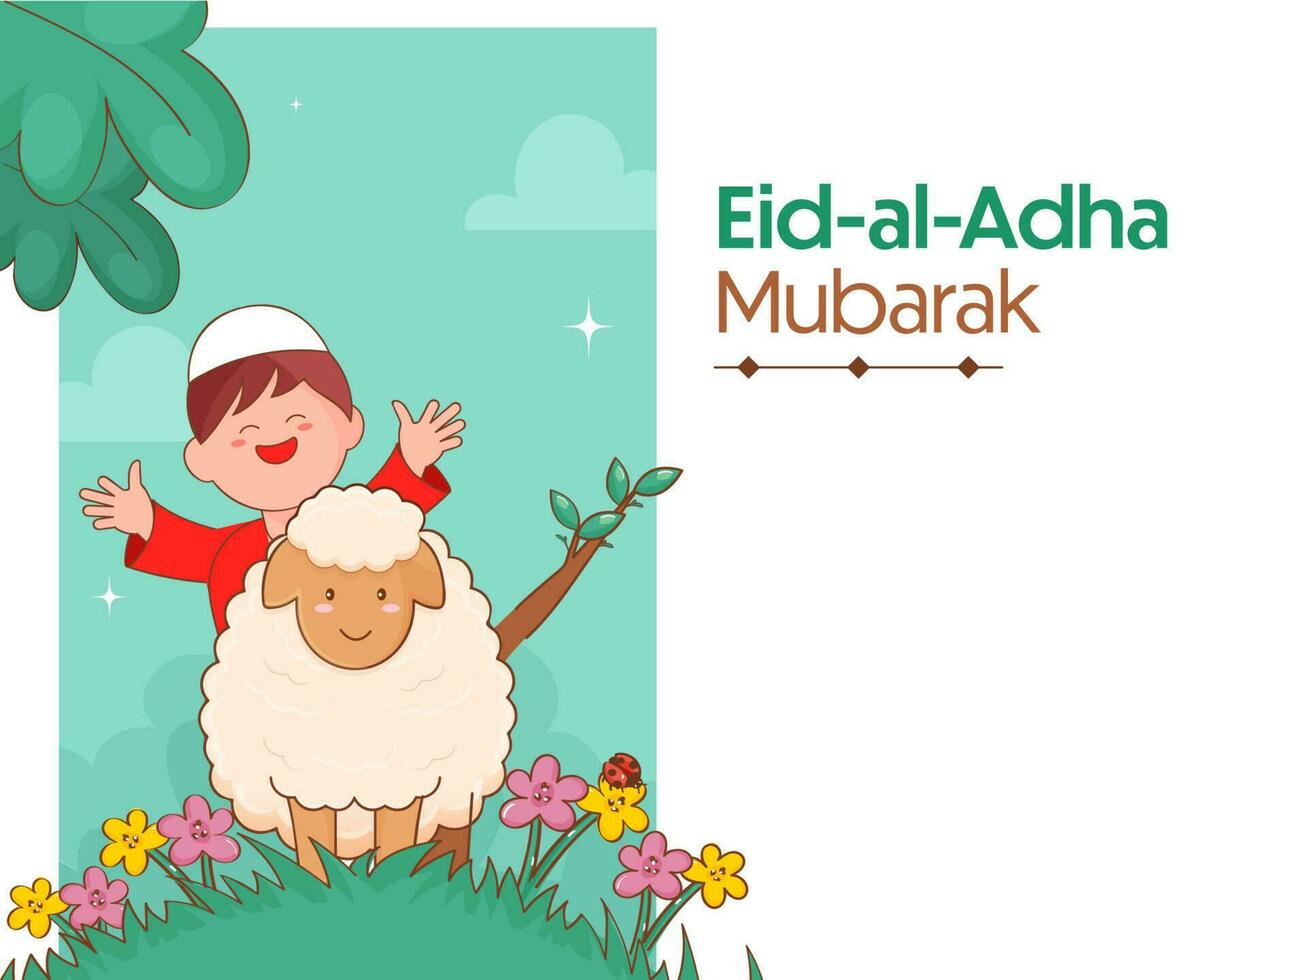 Eid-Al-Adha Mubarak Greeting Card With Cheerful Islamic Boy, Cartoon Sheep, Floral On White And Turquoise Background. vector